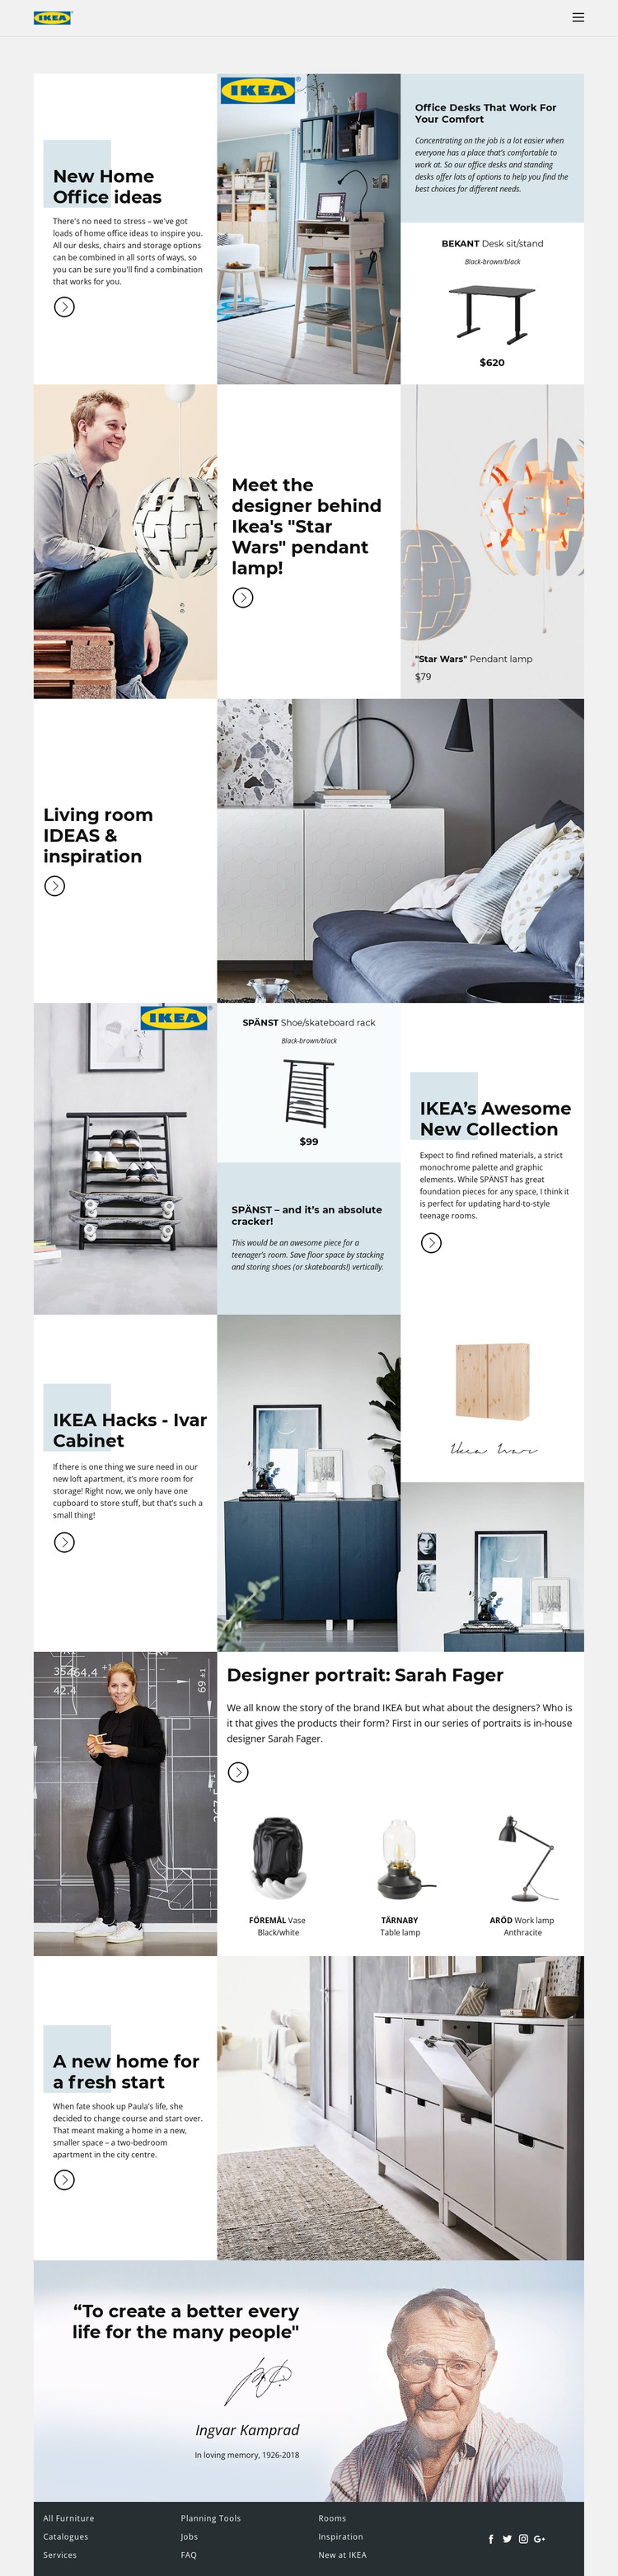 Inspiration from IKEA HTML5 Template